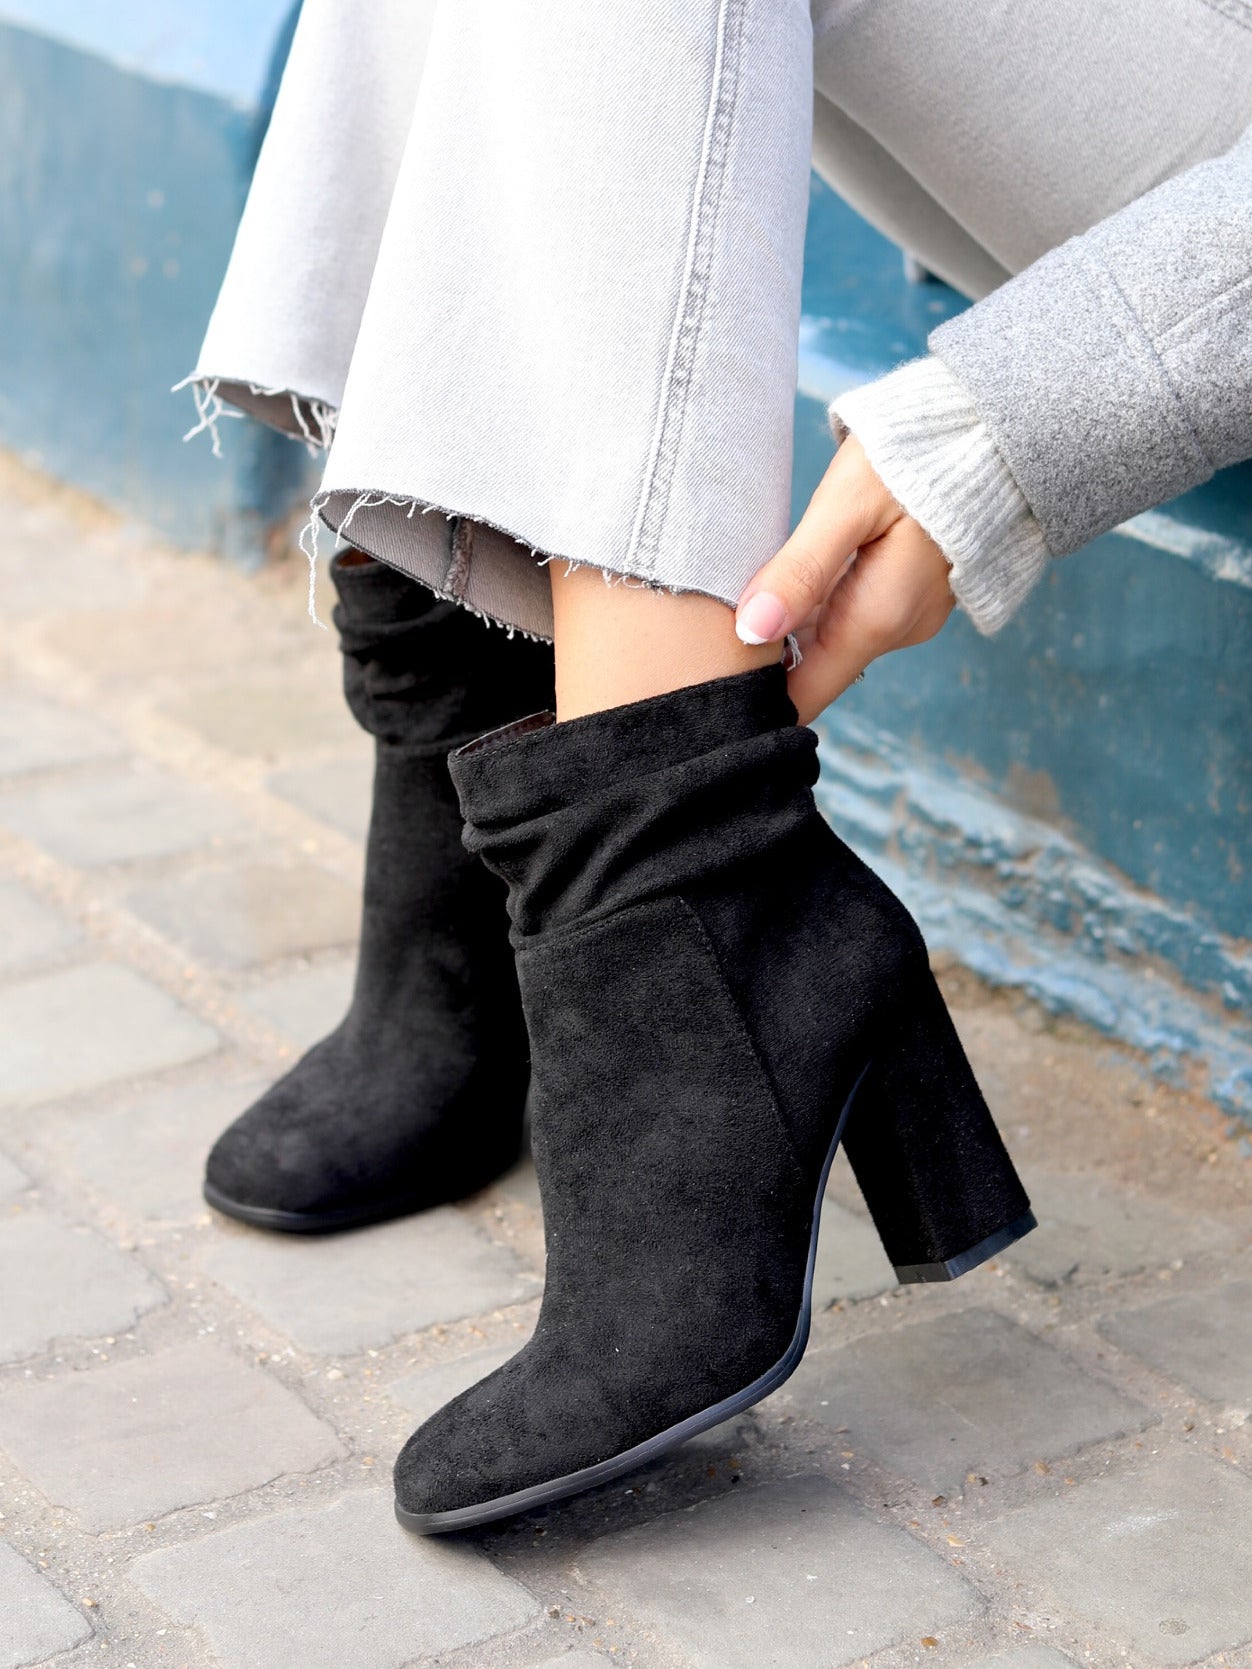 Ruched ankle boots